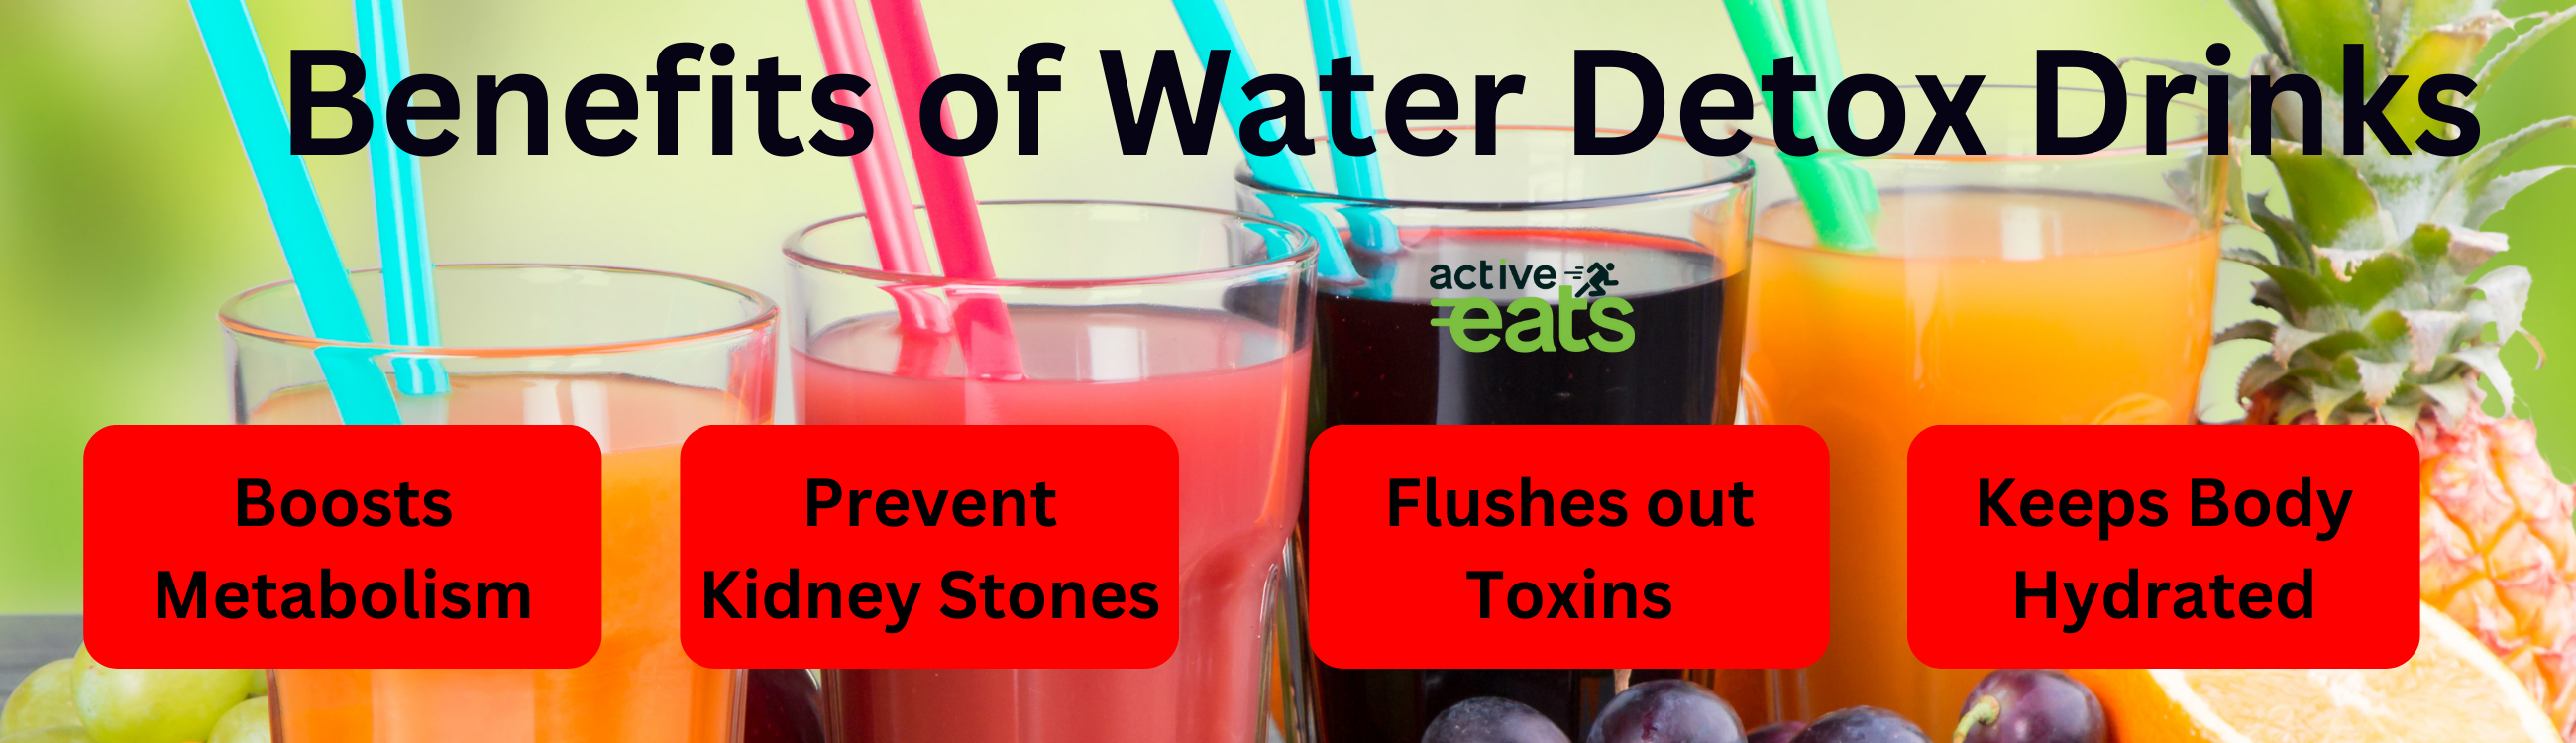 Image: A visual representation of the four key benefits of water detox drinks. The graphic features text and icons that emphasize the advantages, including hydration, improved digestion, increased nutrient intake, and enhanced natural flavor, all attributed to these beverages. This image provides a quick reference to the positive outcomes of incorporating water detox drinks into your diet.